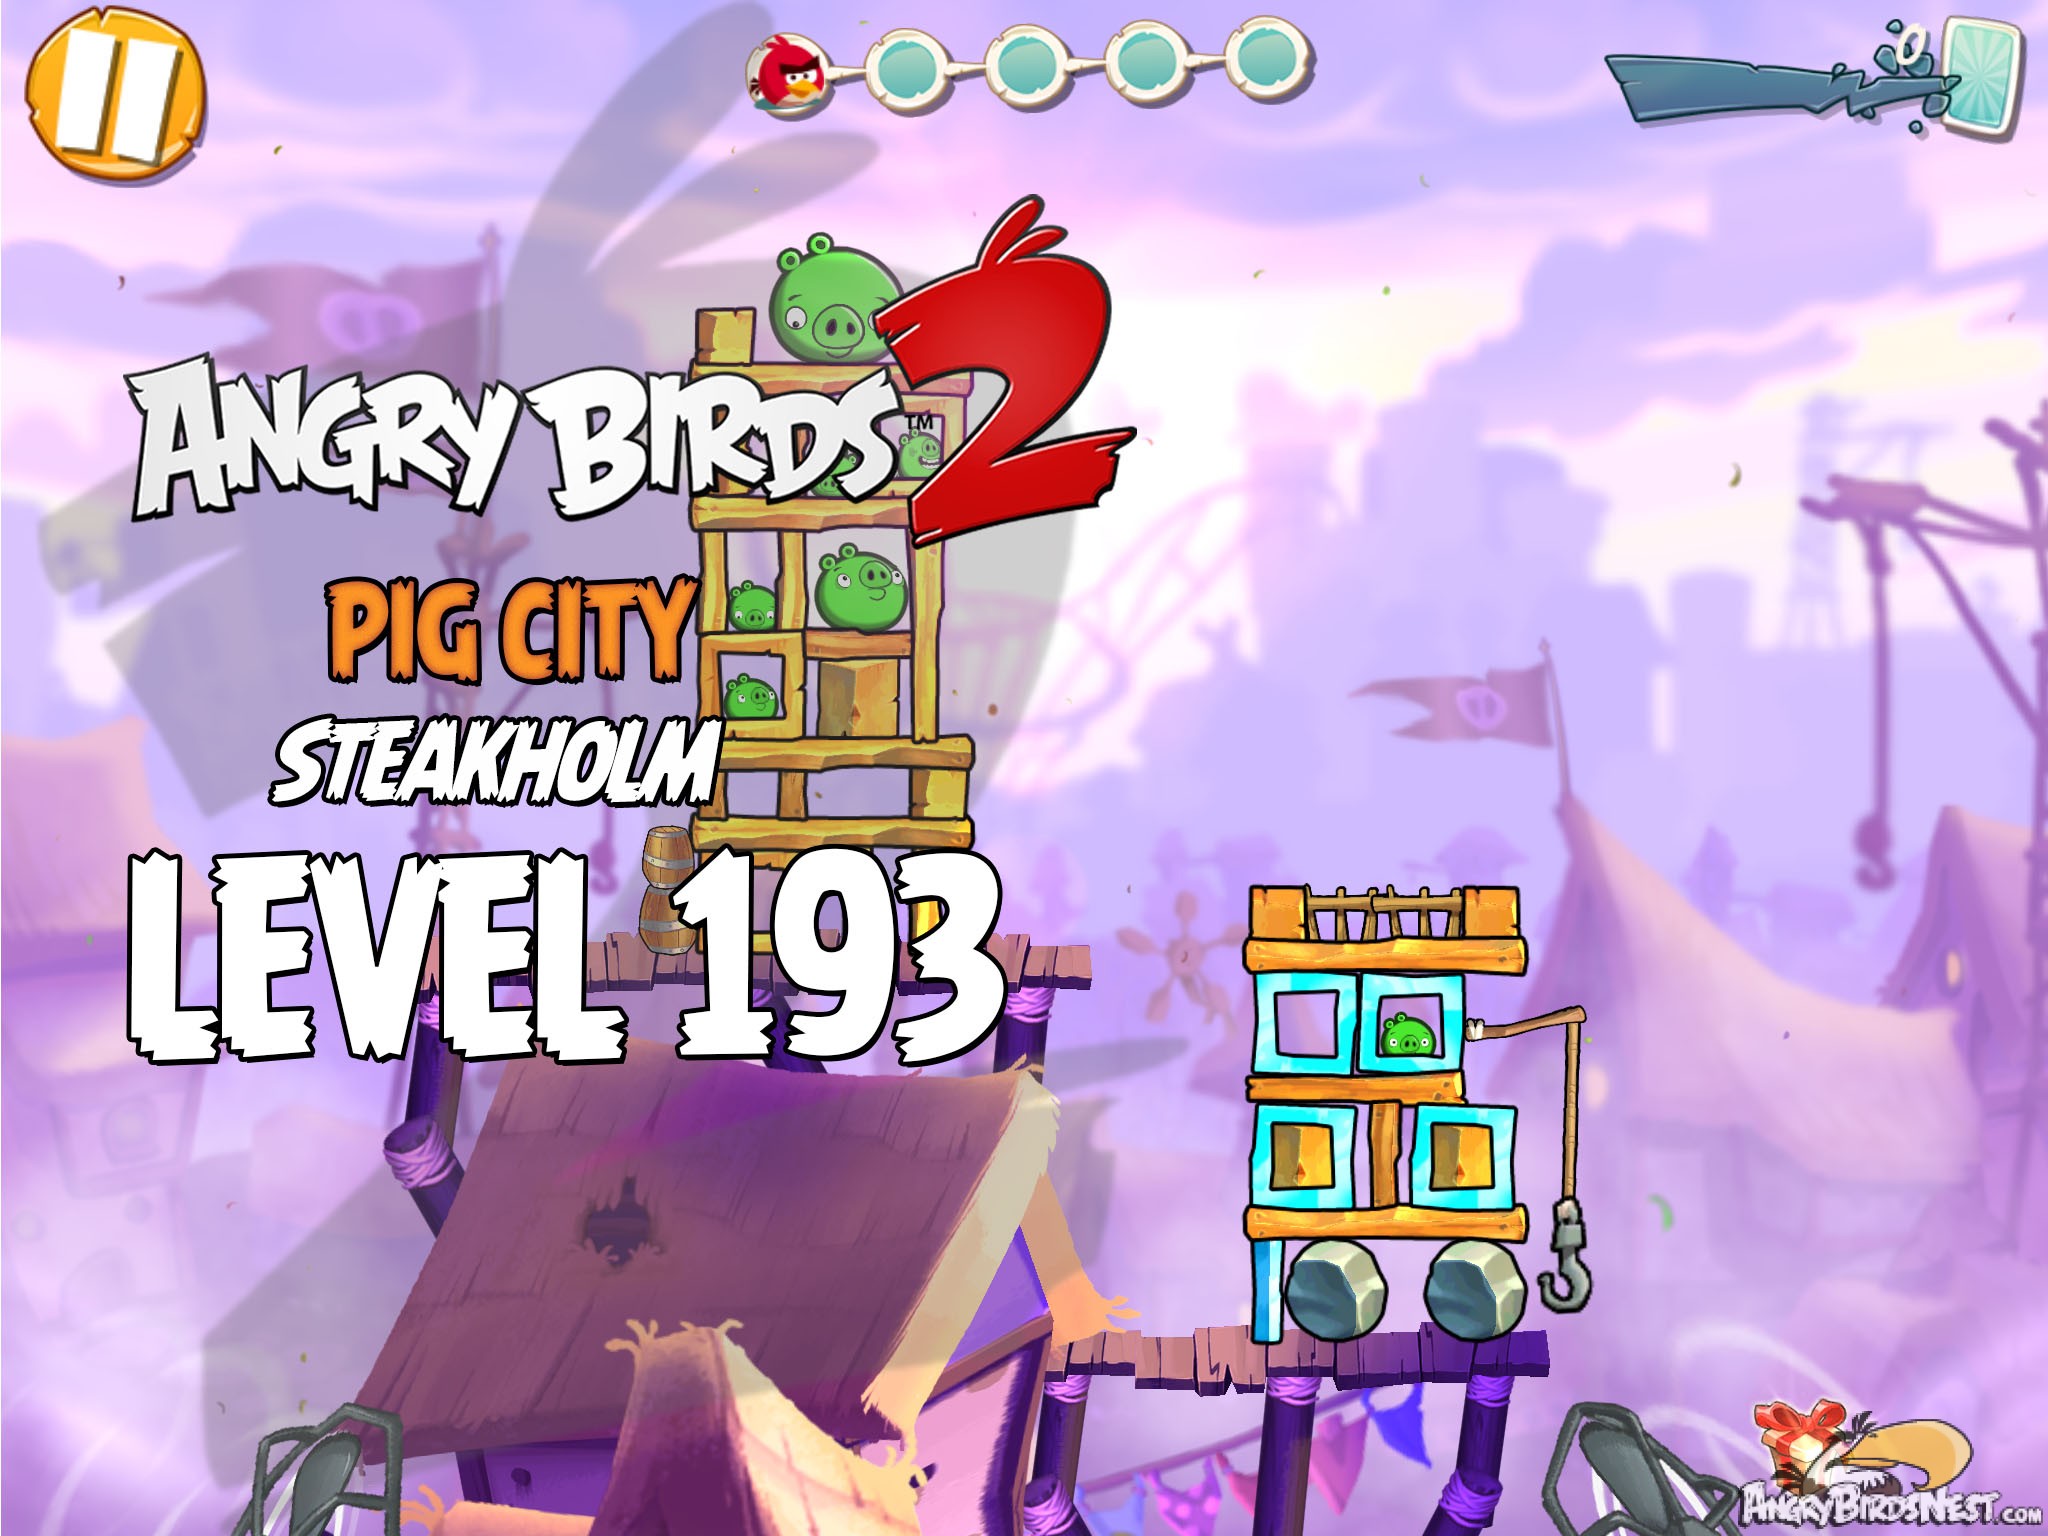 Angry Birds 2 Pig City Steakholm Level 193